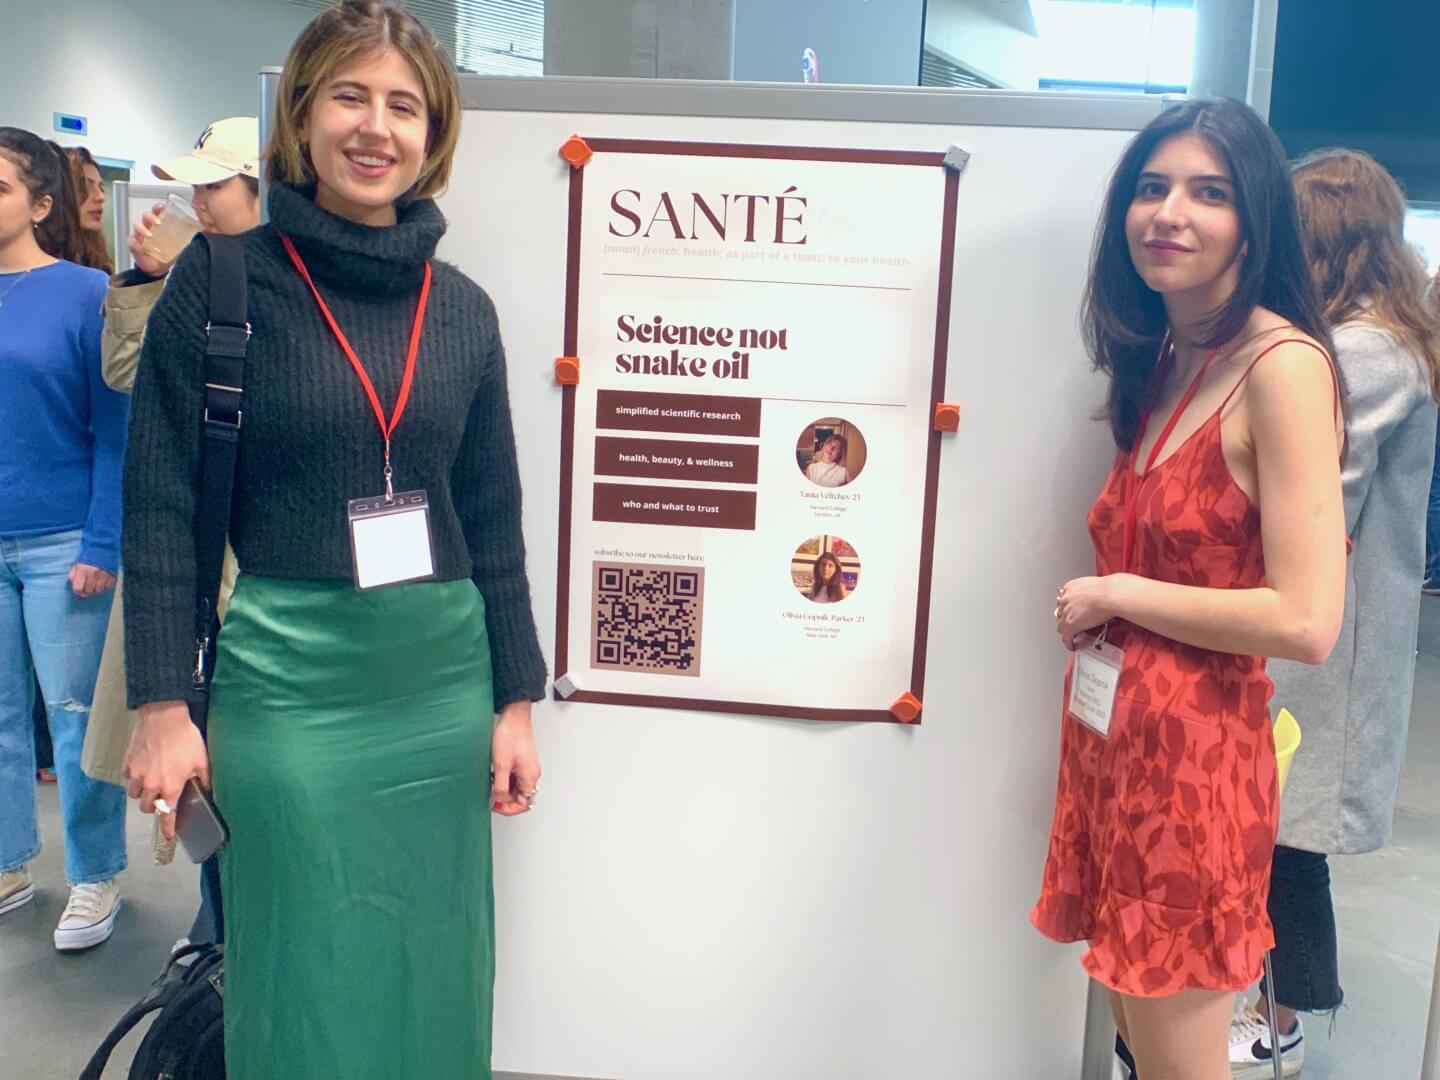 Tania Veltchev and Olivia Gopnik-Parker with their poster for the start-up “Santé"